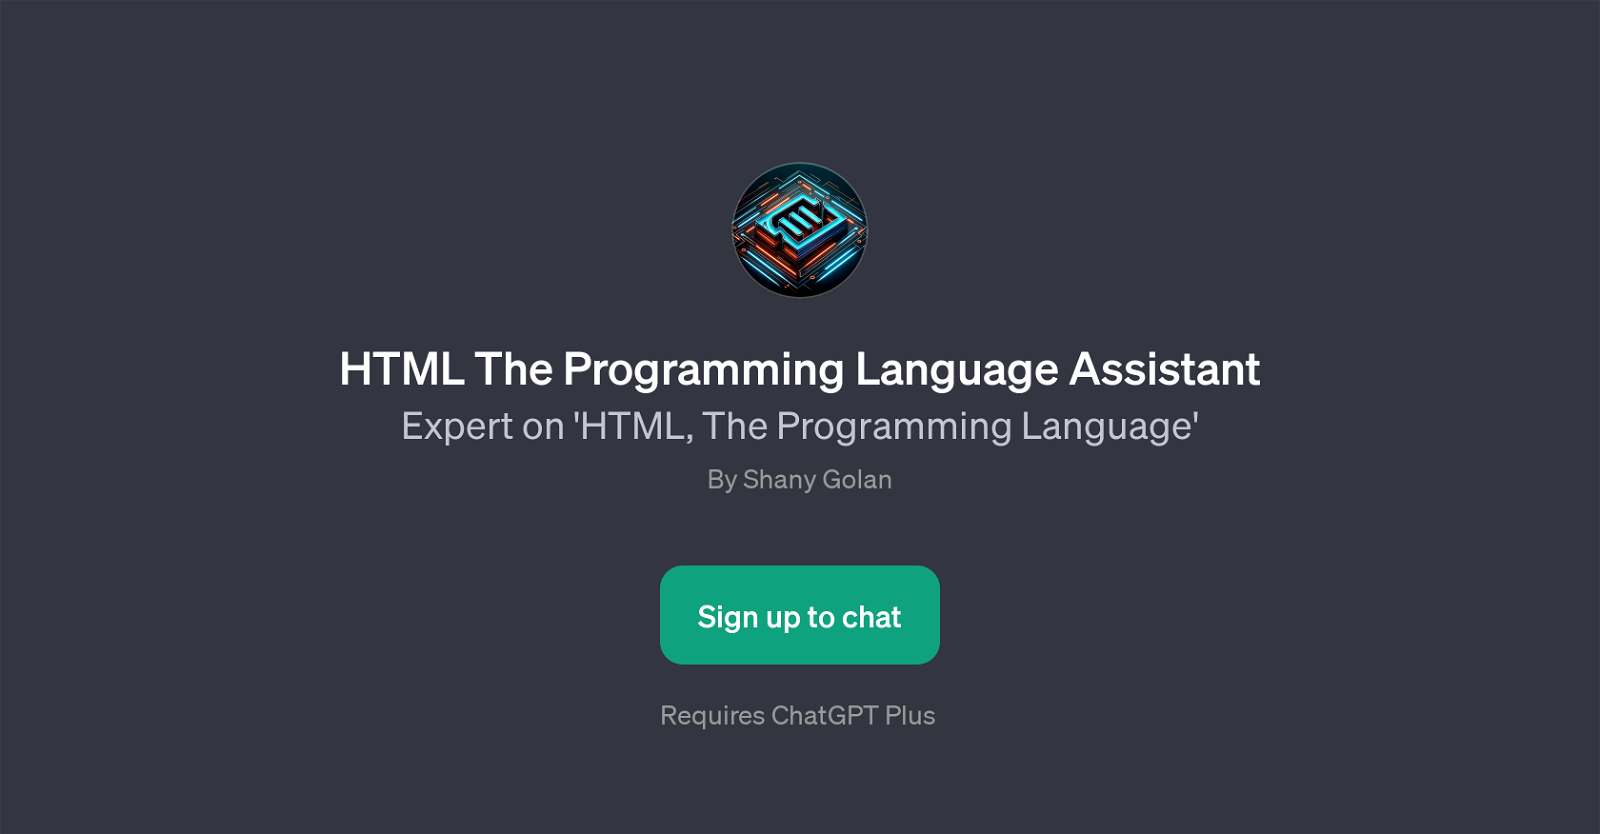 HTML The Programming Language Assistant website